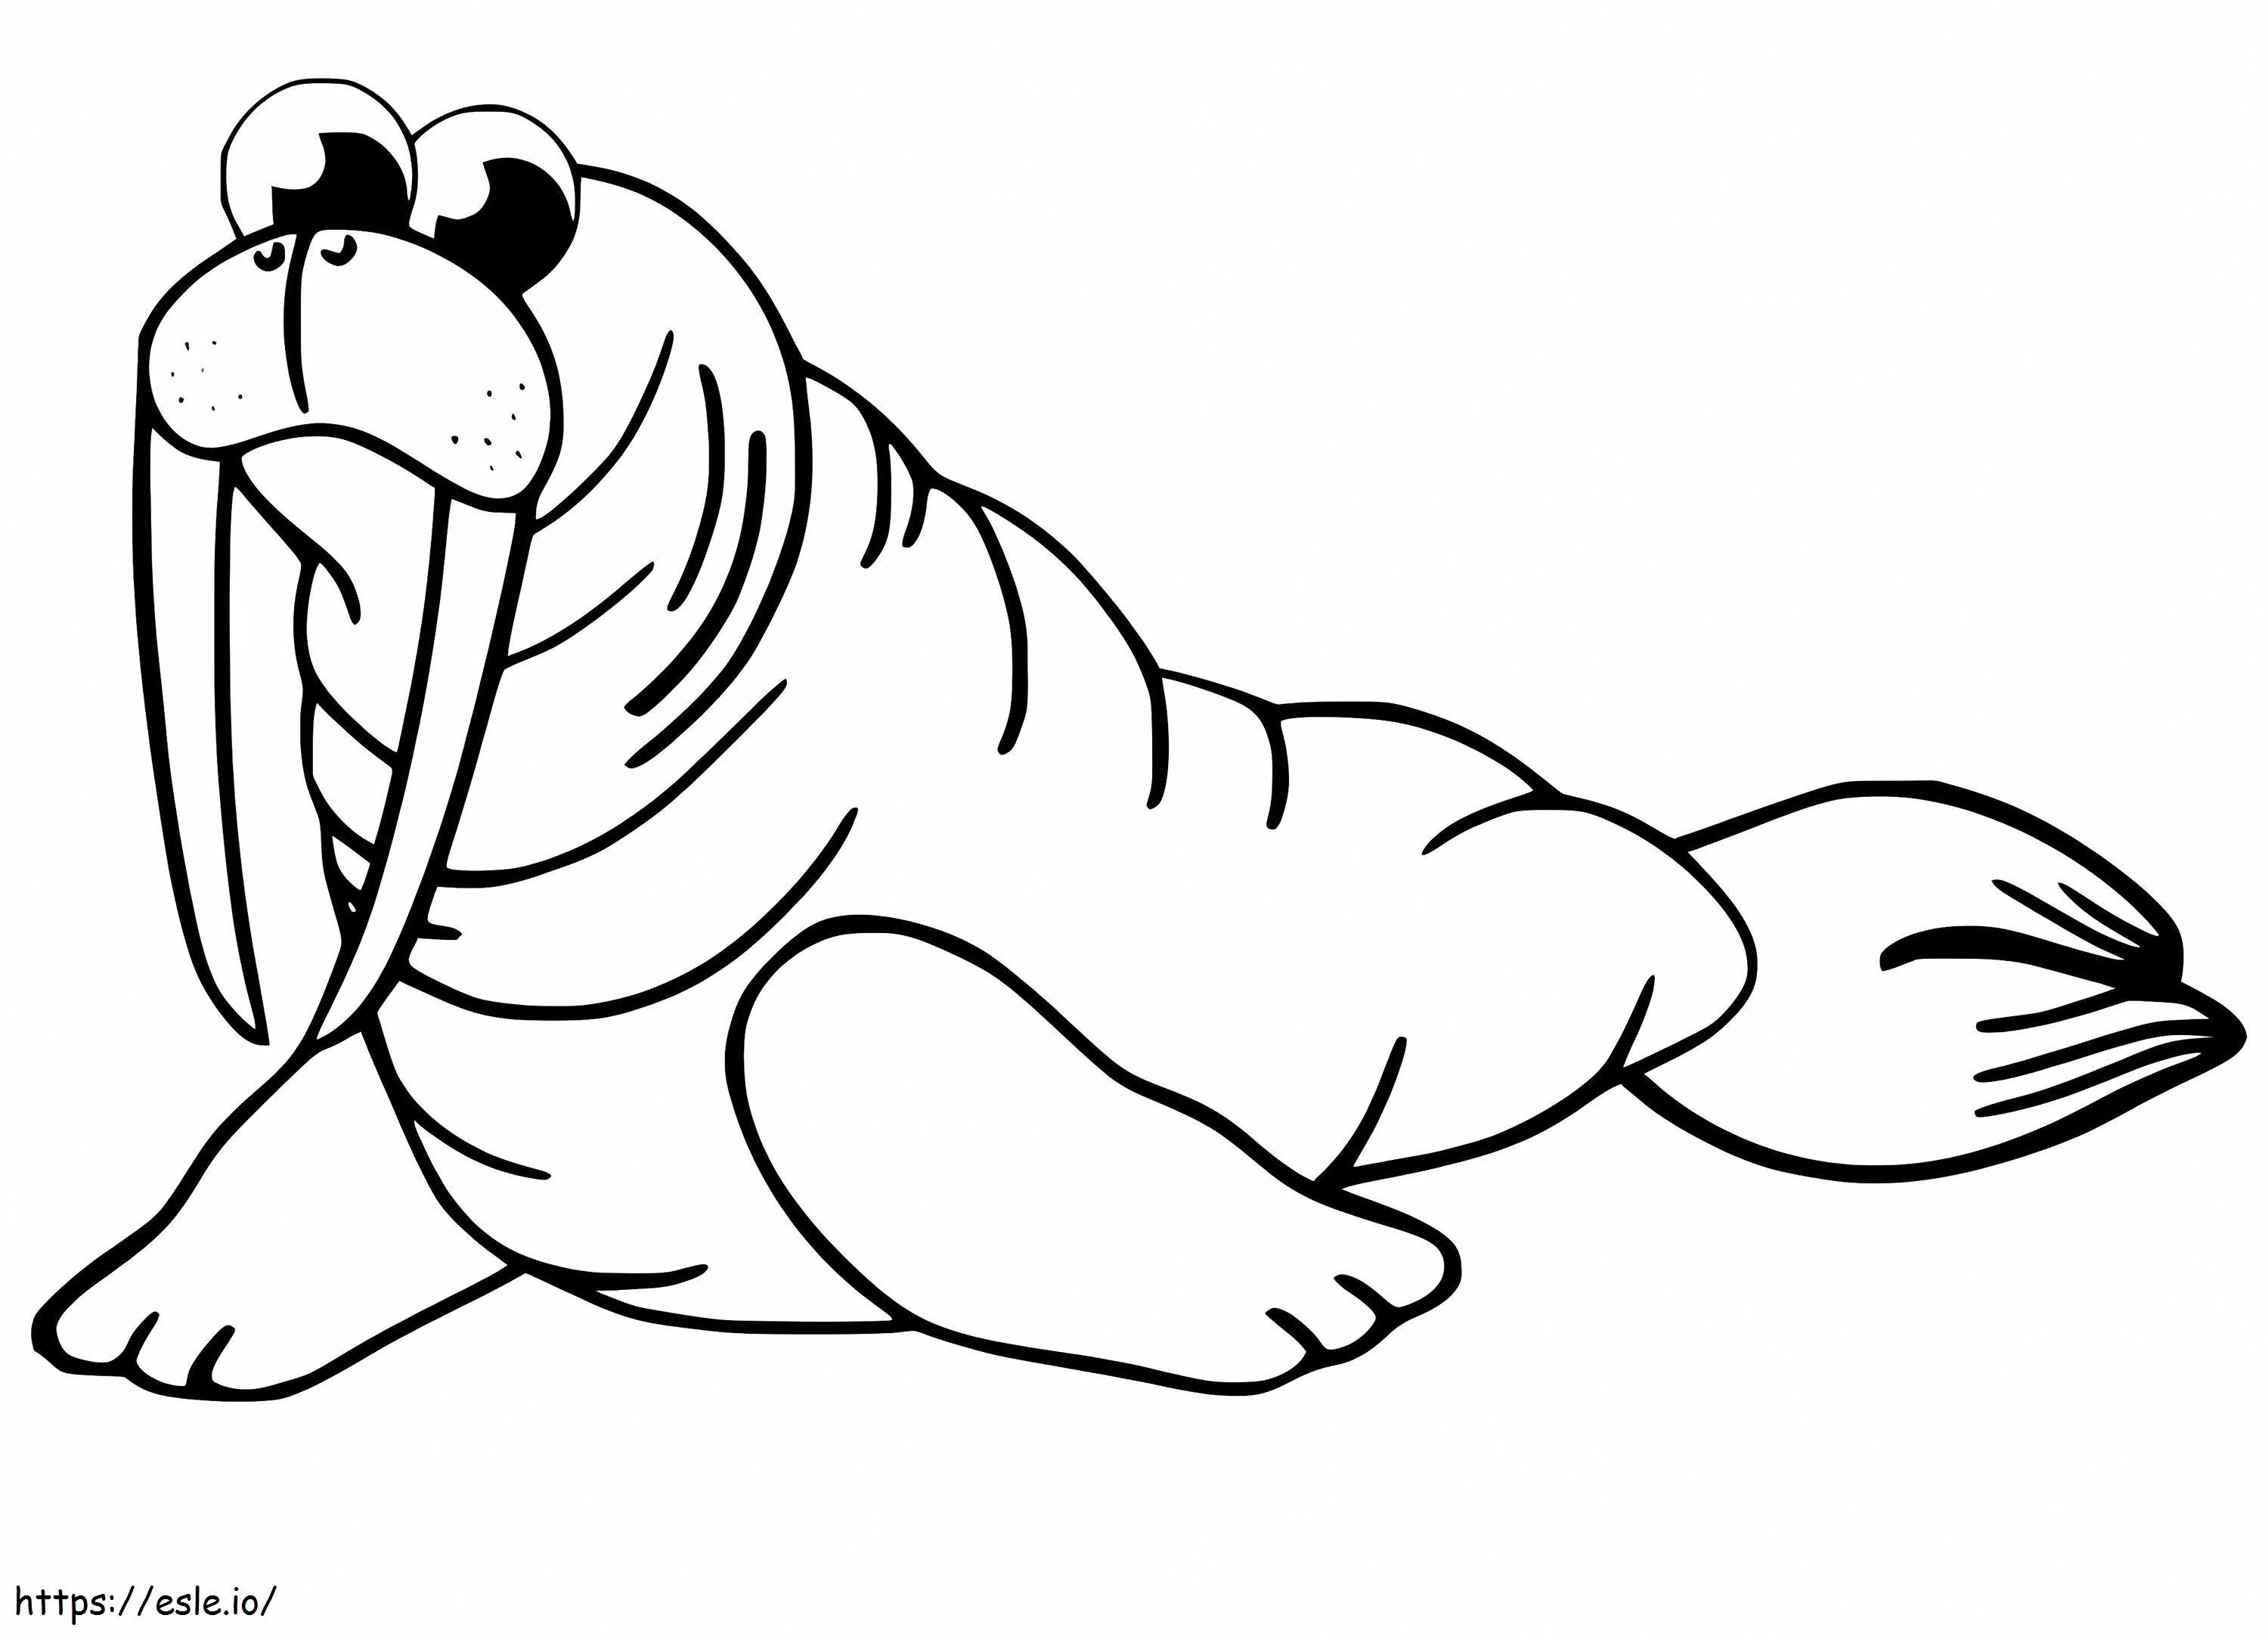 Walrus 16 coloring page